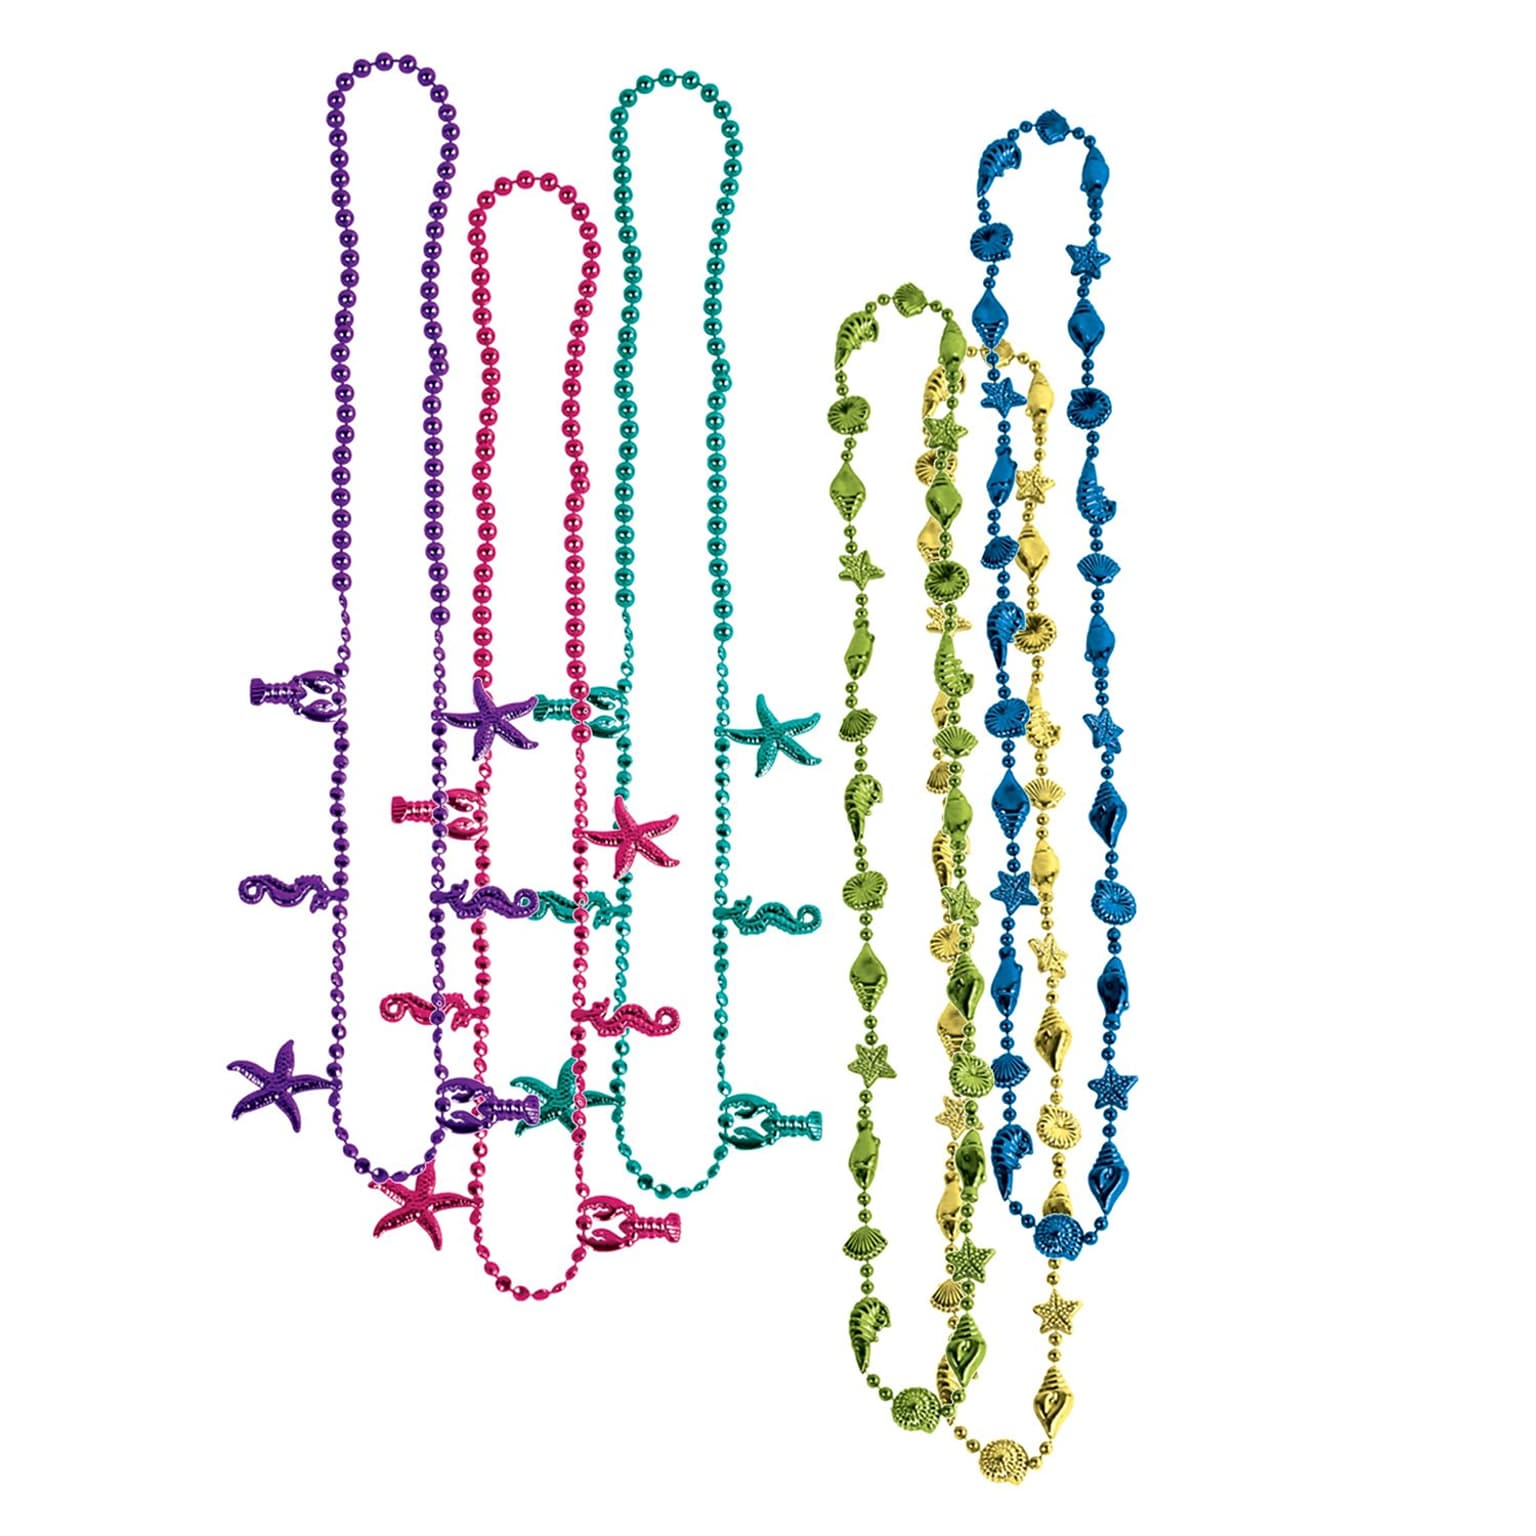 Beistle Luau Beads Necklace; 32, Assorted